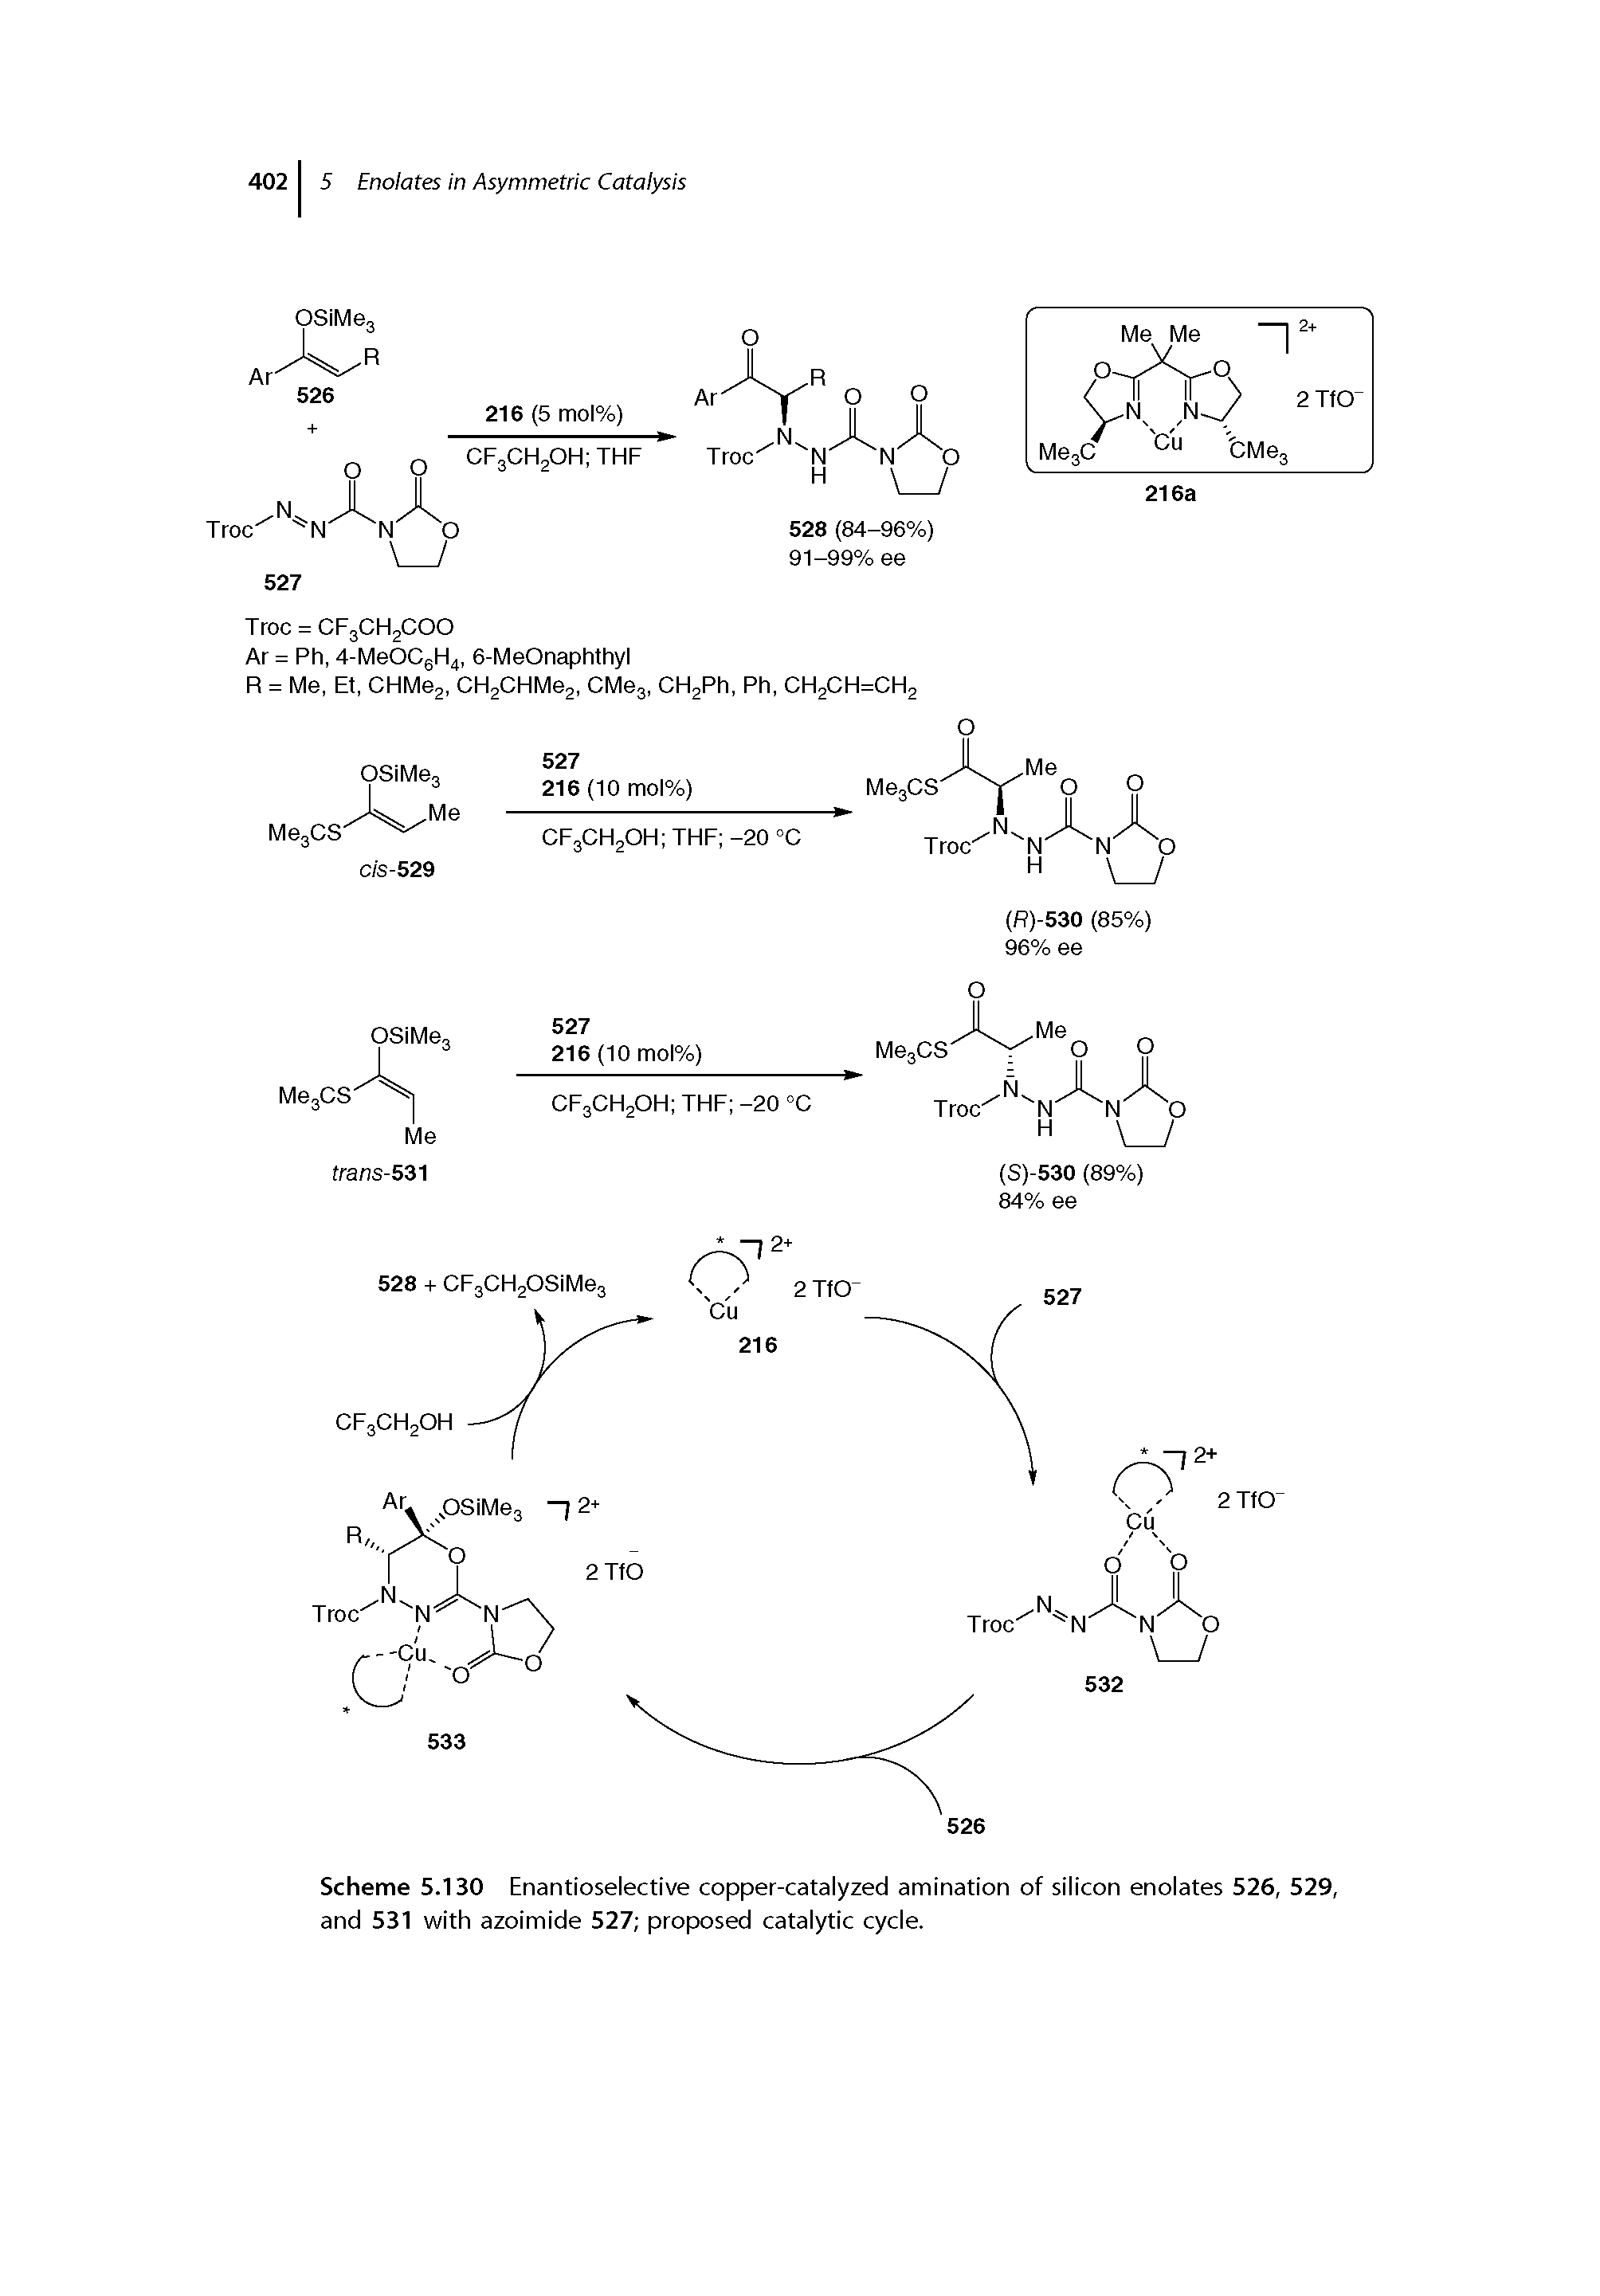 Scheme 5.130 Enantioselective copper-catalyzed amination of silicon enolates 526, 529, and 531 with azoimide 527 proposed catalytic cycle.